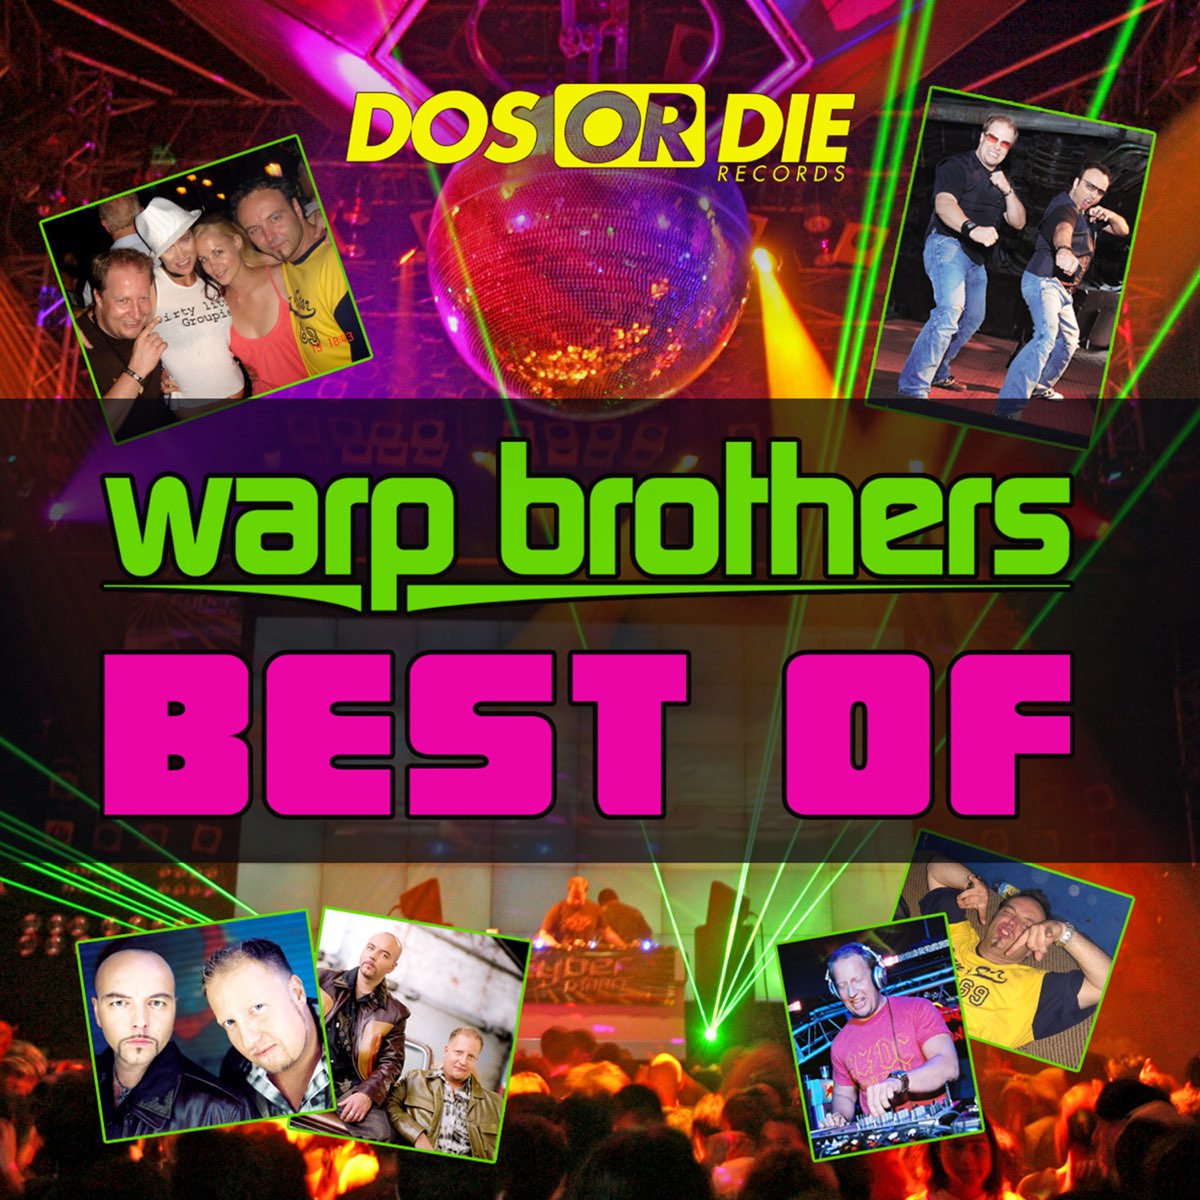 Best of Warp Brothers by Warp Brothers on Apple Music